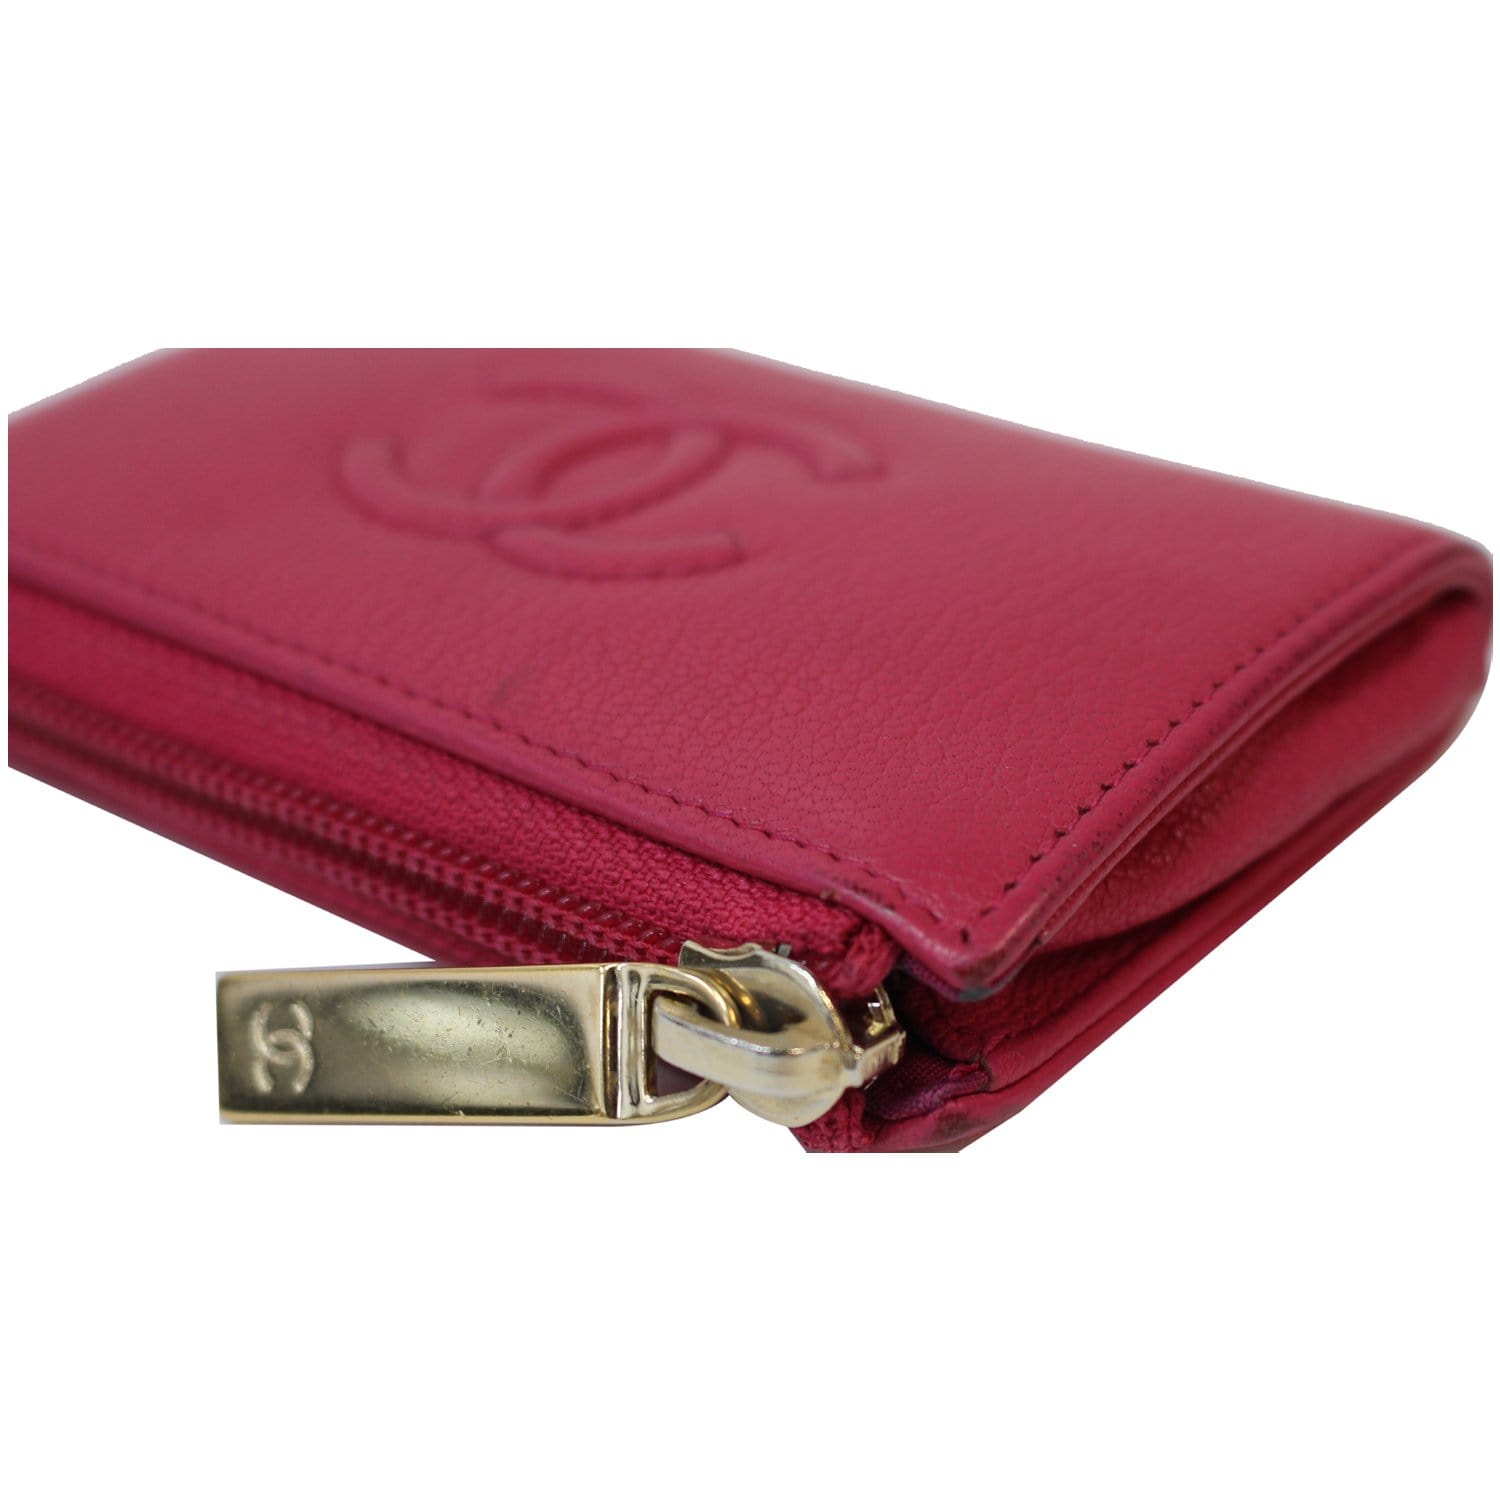 Chanel Quilted Key Holder Case Coral